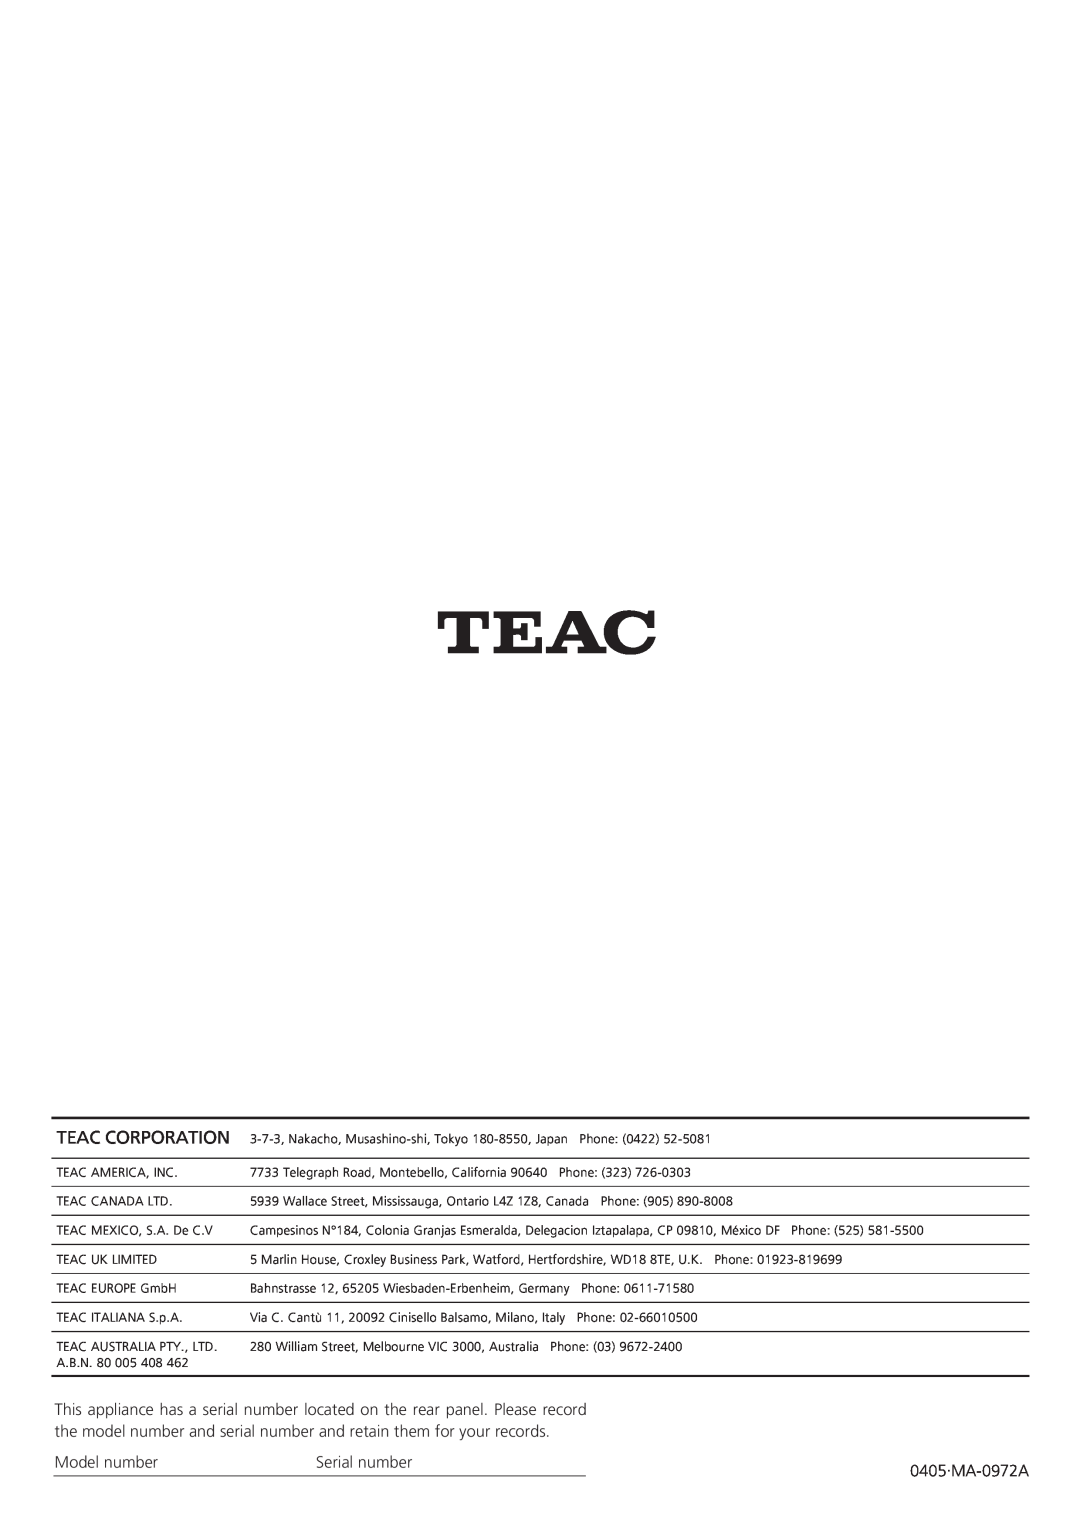 Teac MC-DX25 owner manual Teac Corporation, Model number, Serial number, 0405.MA-0972A 